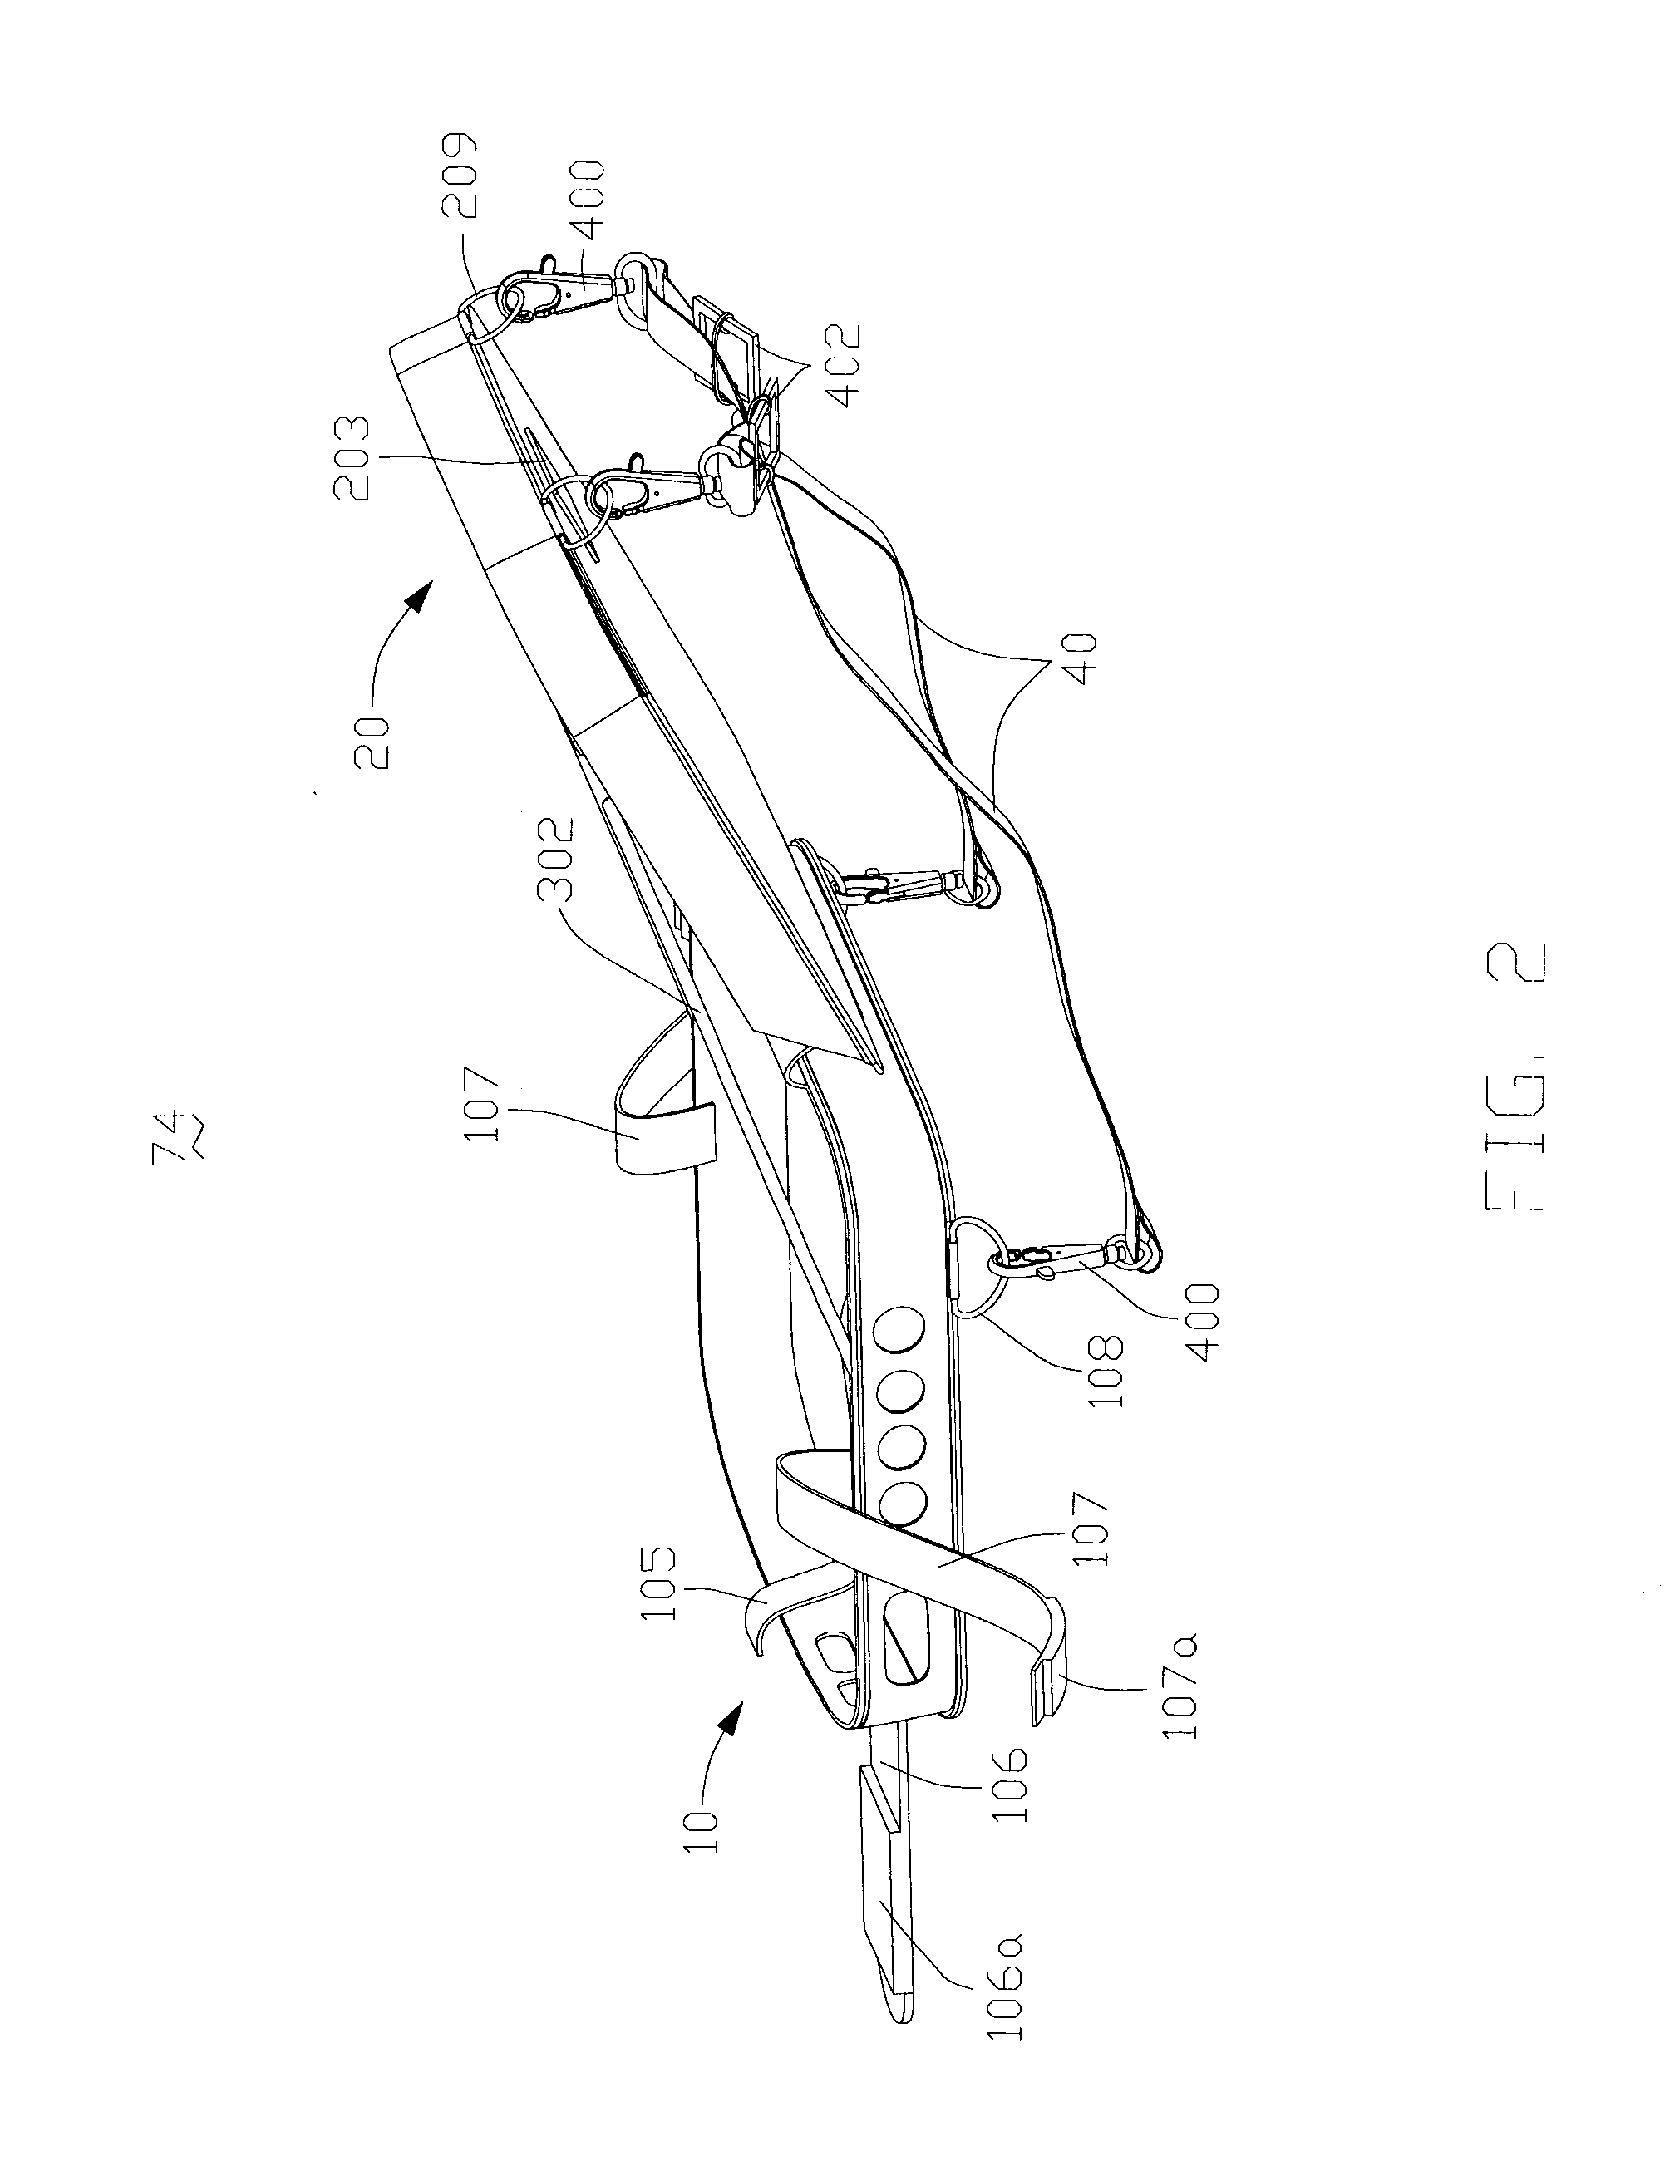 Carrying bag for suspending electronic entertainment apparatus